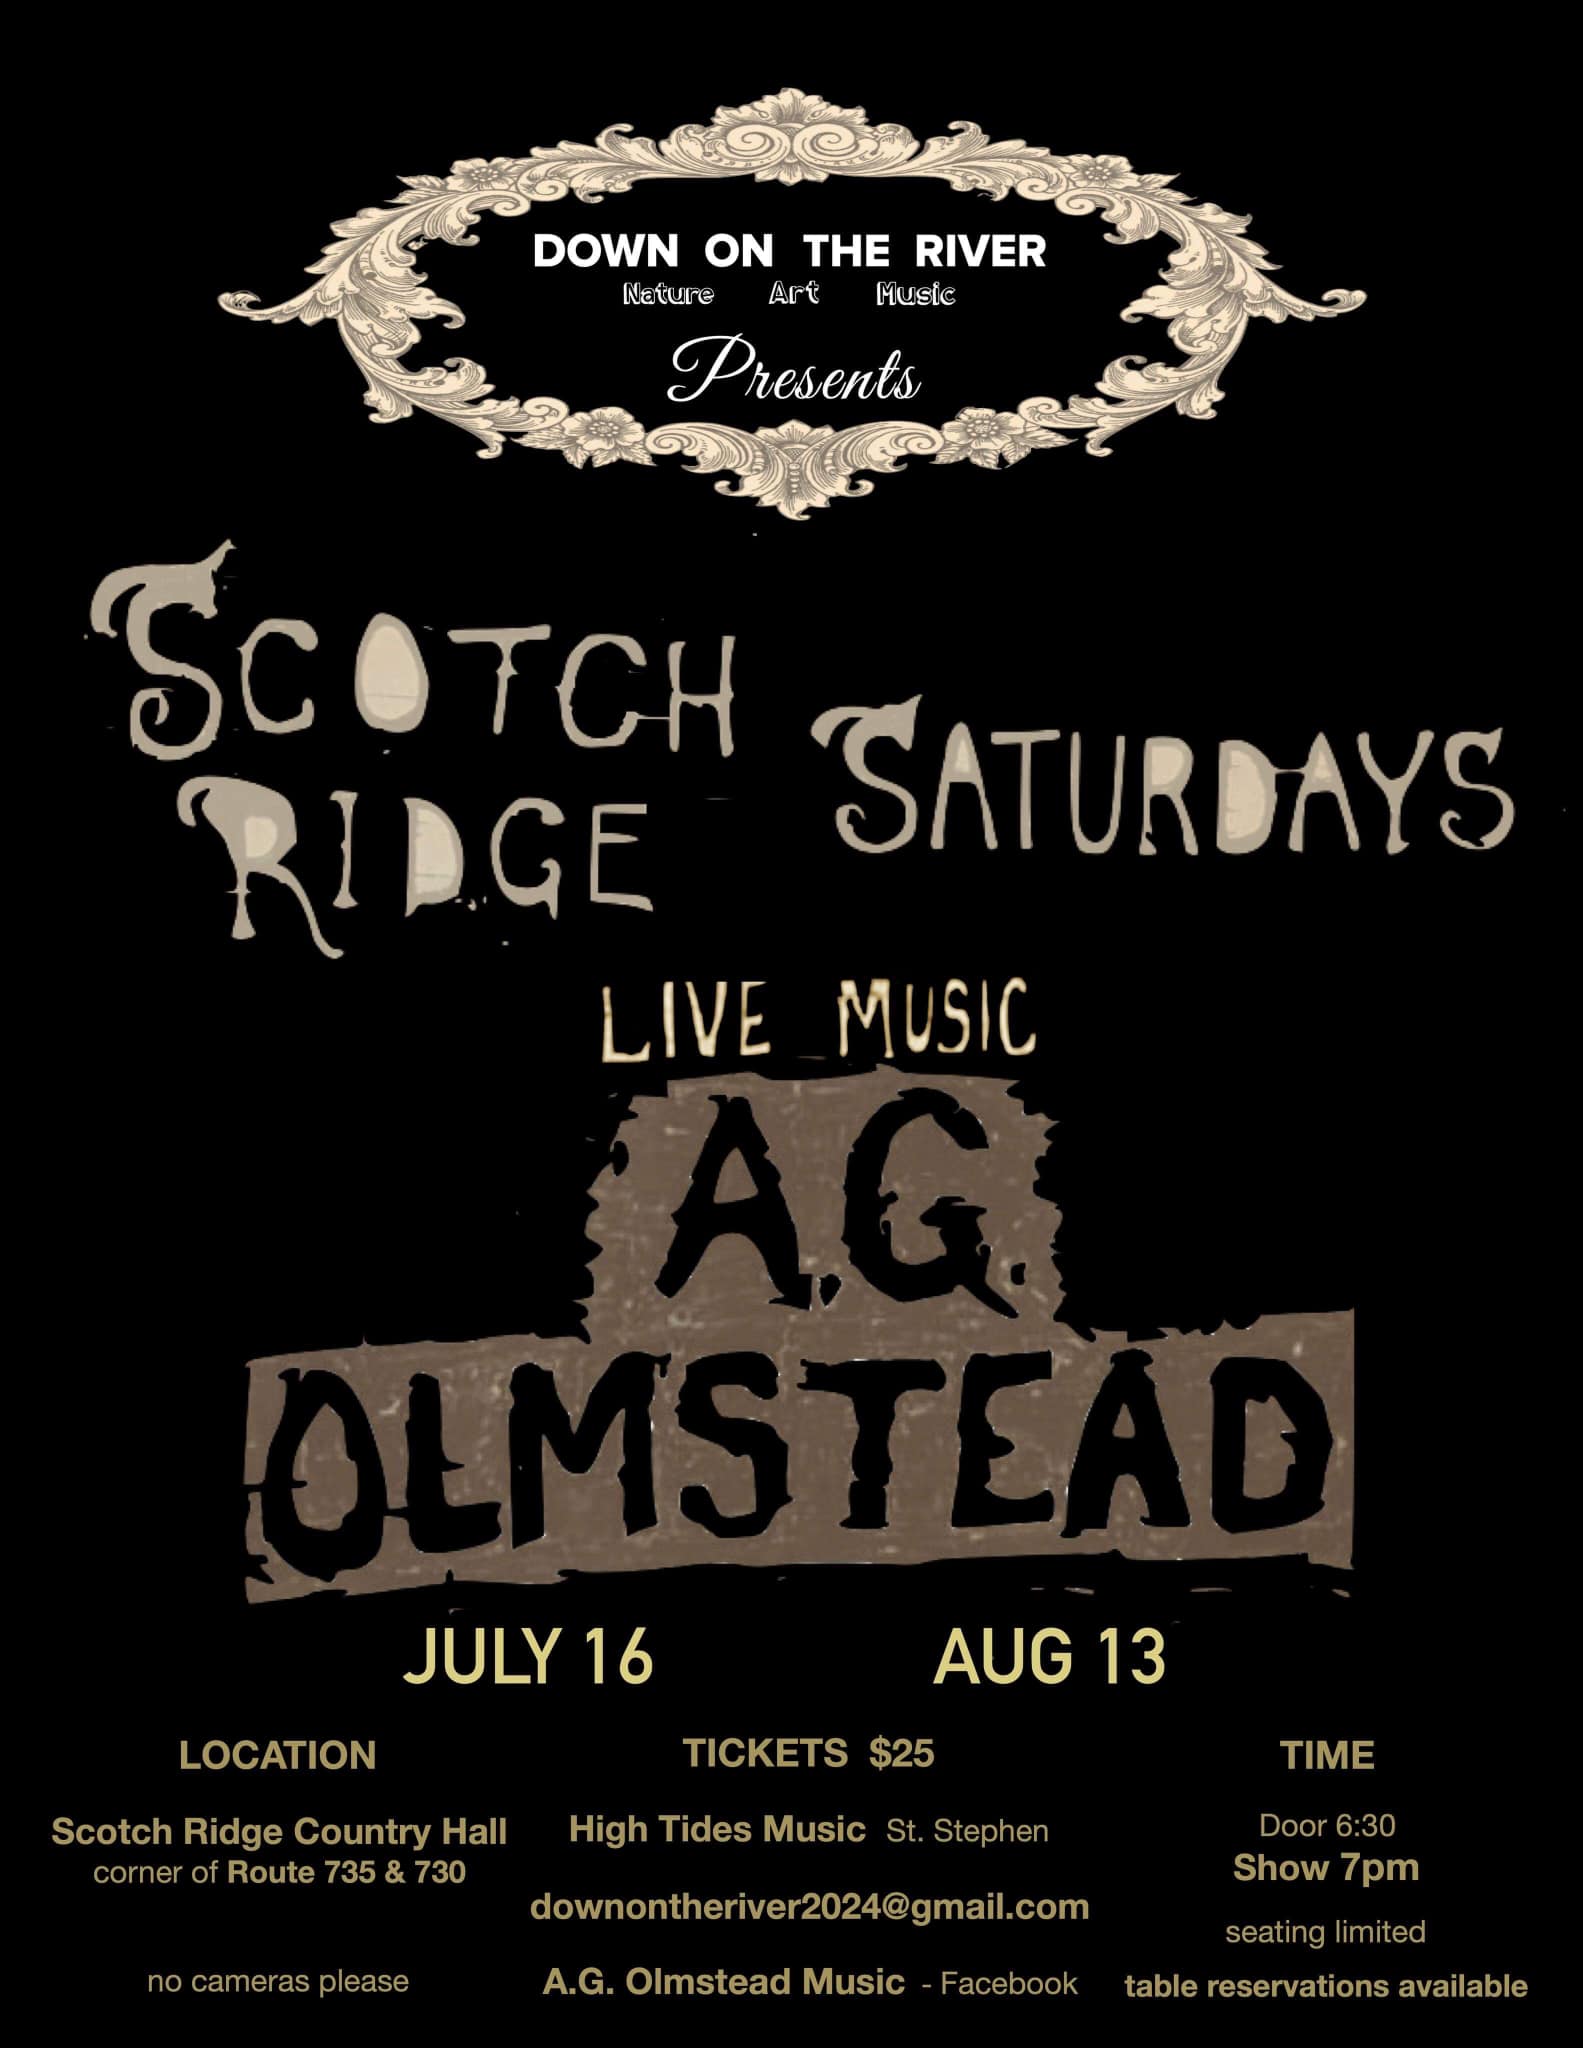 Down on the River Nature, Art, Music presents, Scotch Ridge Saturdays. Live music with AG Olmstead. July 16. Location, Scotch Ridge Country Hall, corner of Route 735 & 730. No cameras please. Tickets $25. High Tides Music in St. Stephen, downontheriver2024@gmail.com AG Olmstead Music, Facebook. Time, door 6:30, show 7 pm. Seating limited. Table reservations available.